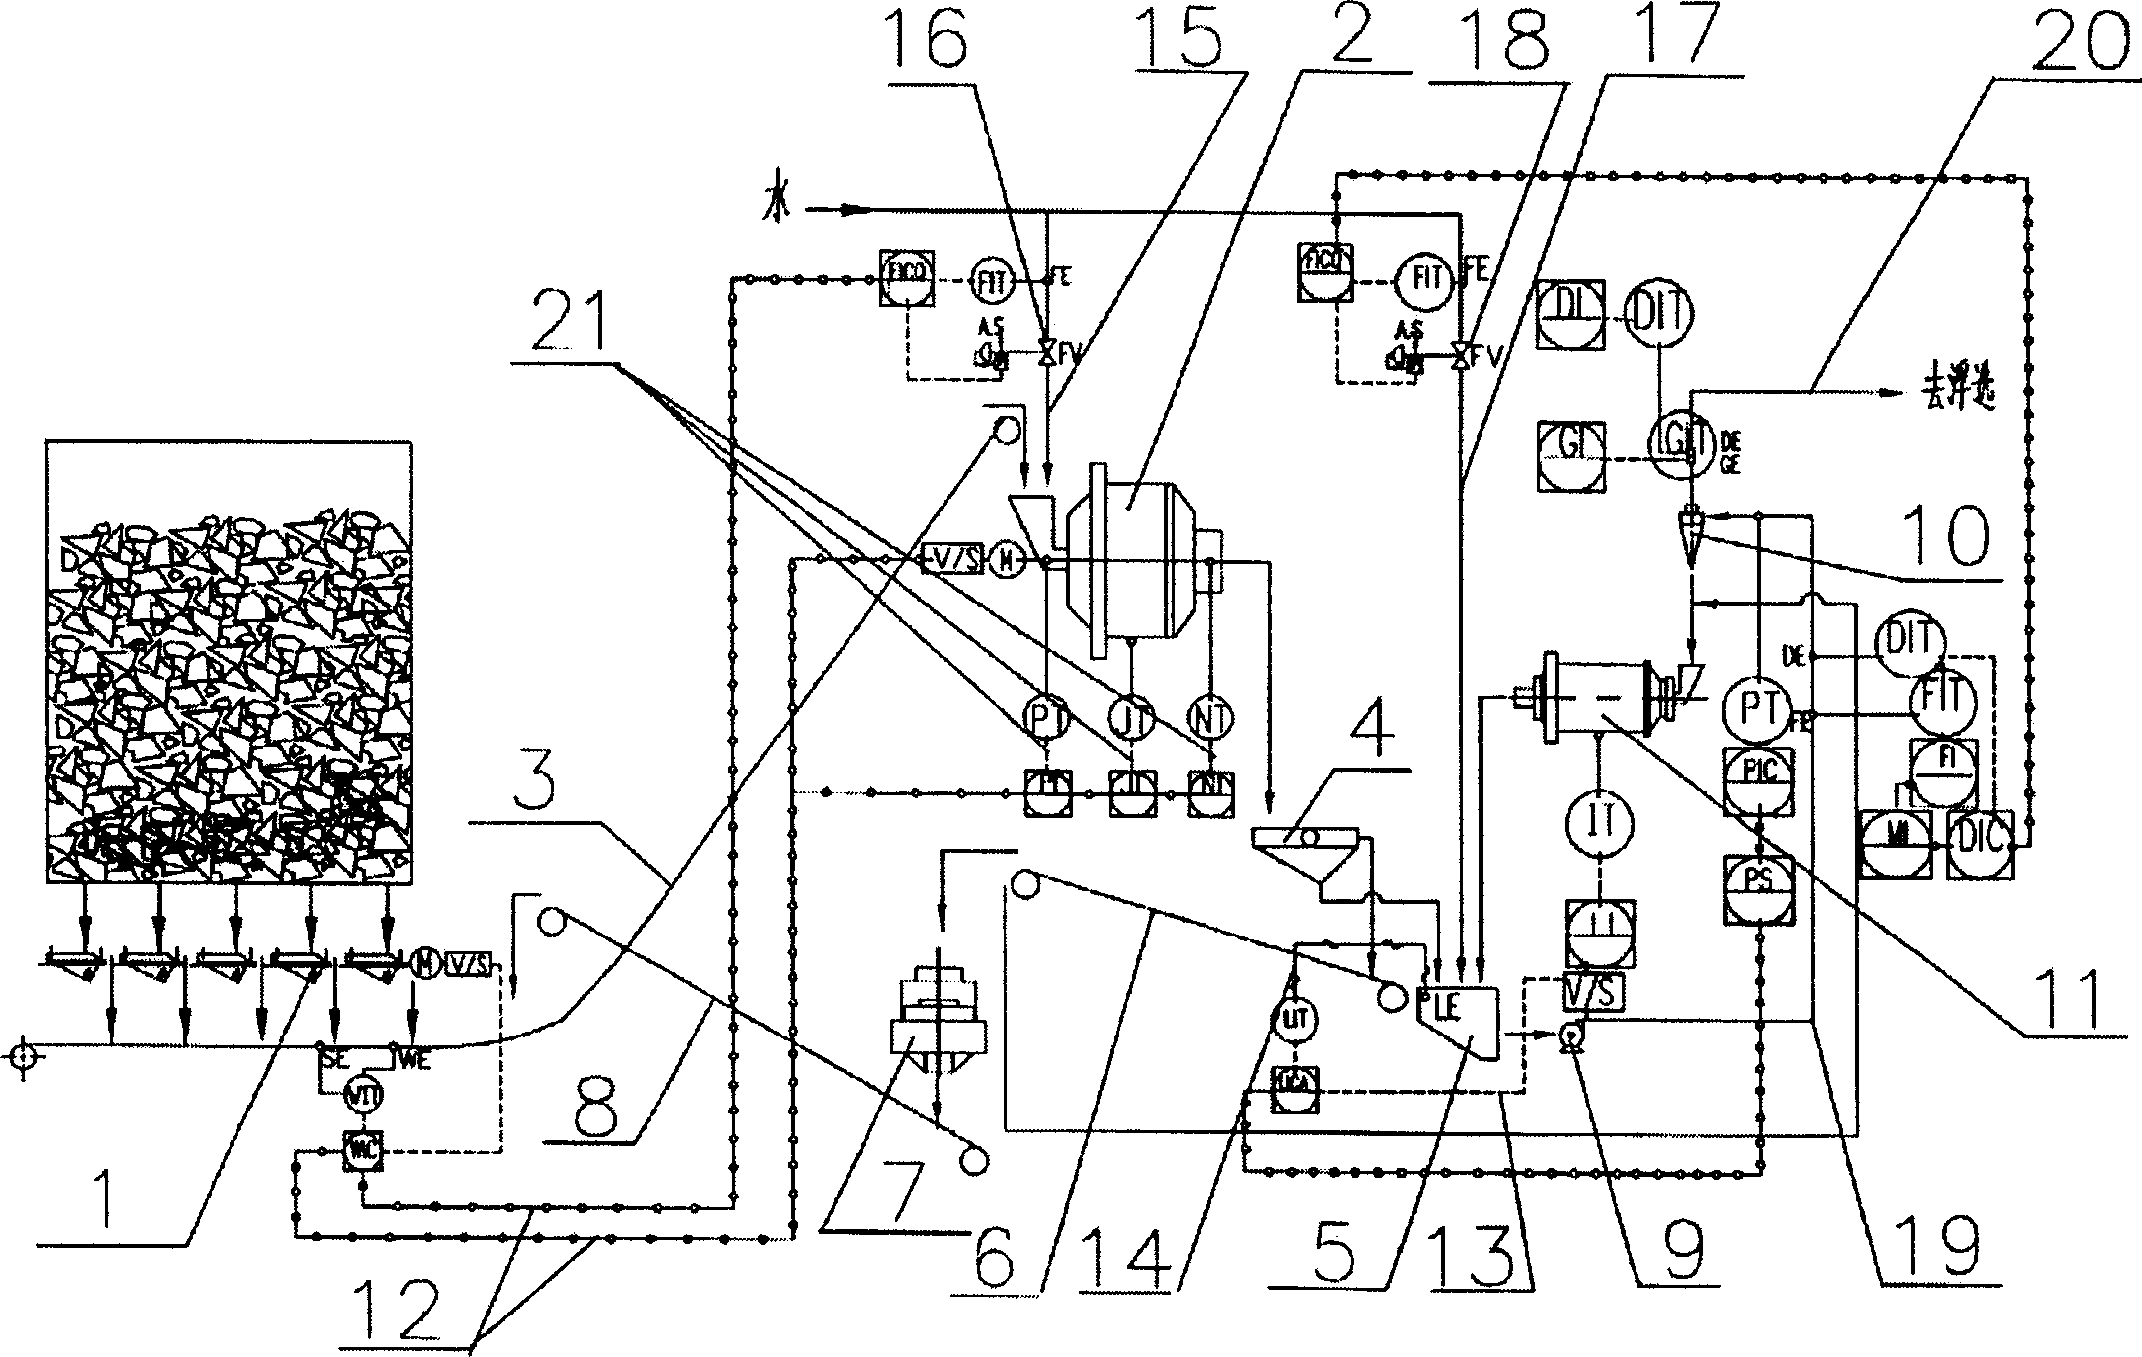 Semi-automill ball-milling type ore grinding system and its control system